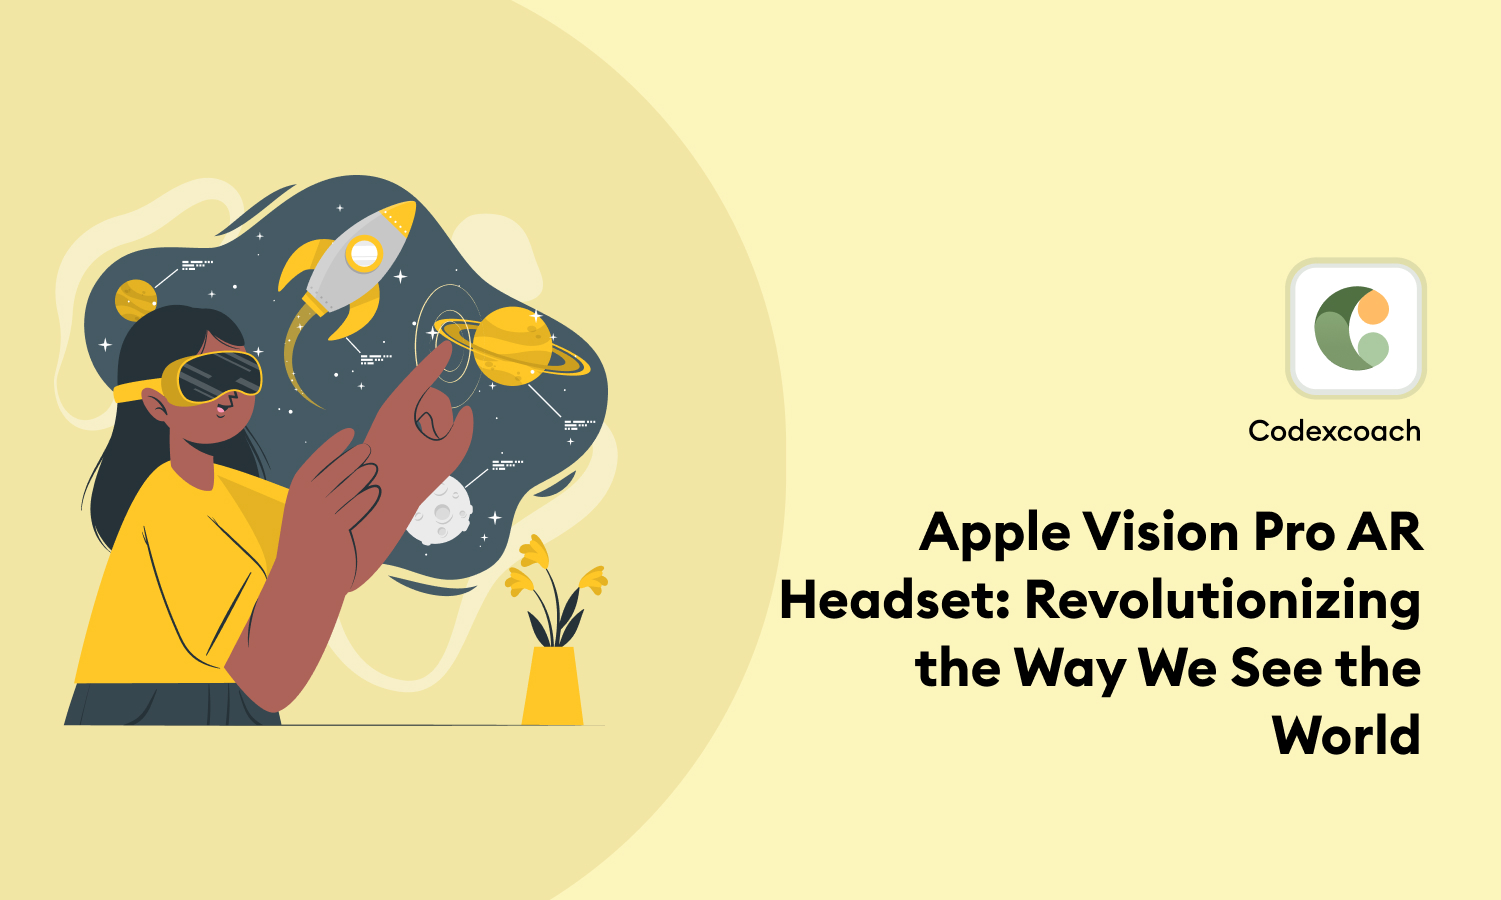 Apple Vision Pro AR Headset Revolutionizing the Way We See the World